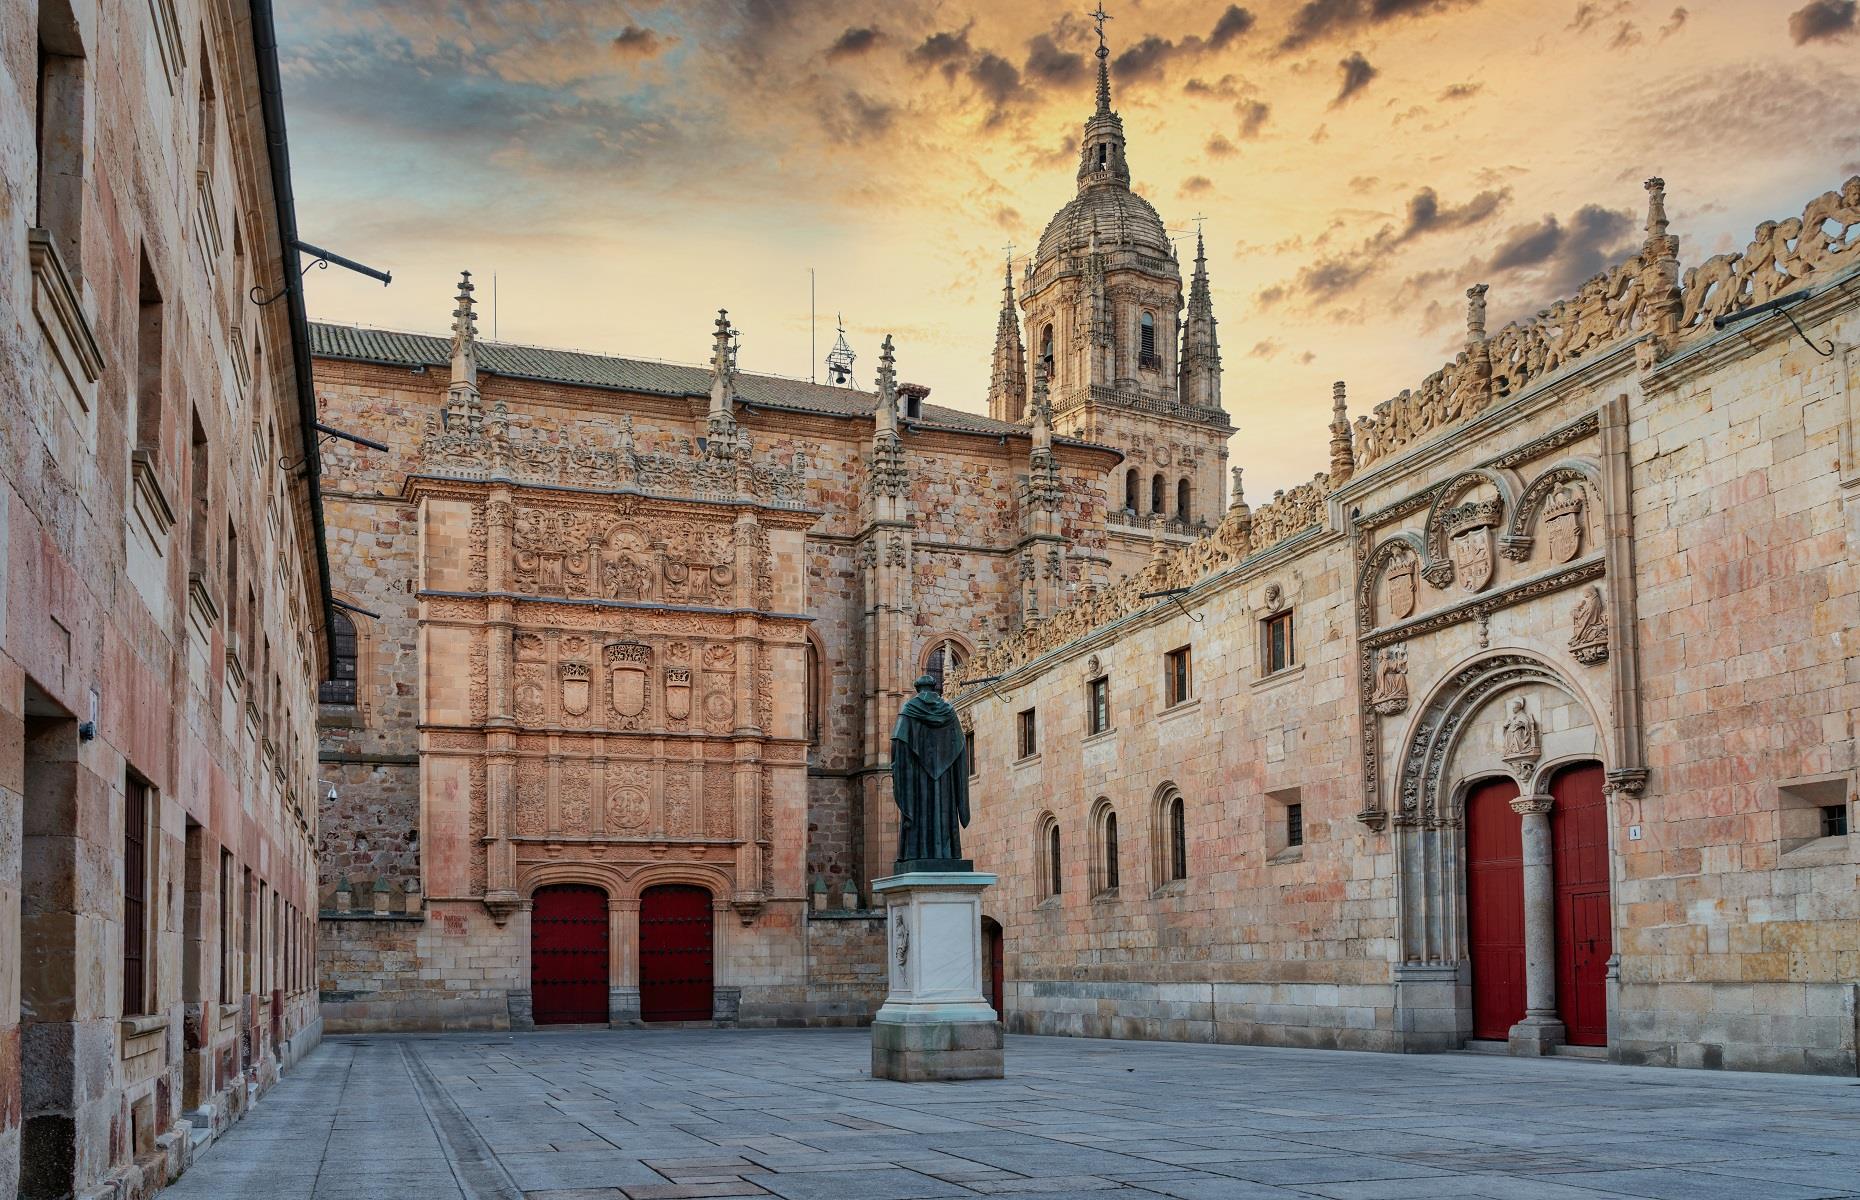 <p>On the complete opposite end of the architectural spectrum, you'll find the <a href="https://www.usal.es/">University of Salamanca</a>. Founded in the 12th century, this institution is one of the oldest universities in existence. The college was given a Royal Charter by King Alfonso IX in 1218 and blends Romanesque, Gothic, Moorish, Renaissance and Baroque architecture. In fact, the entire city of Salamanca was named a UNESCO World Heritage Site in 1988.</p>